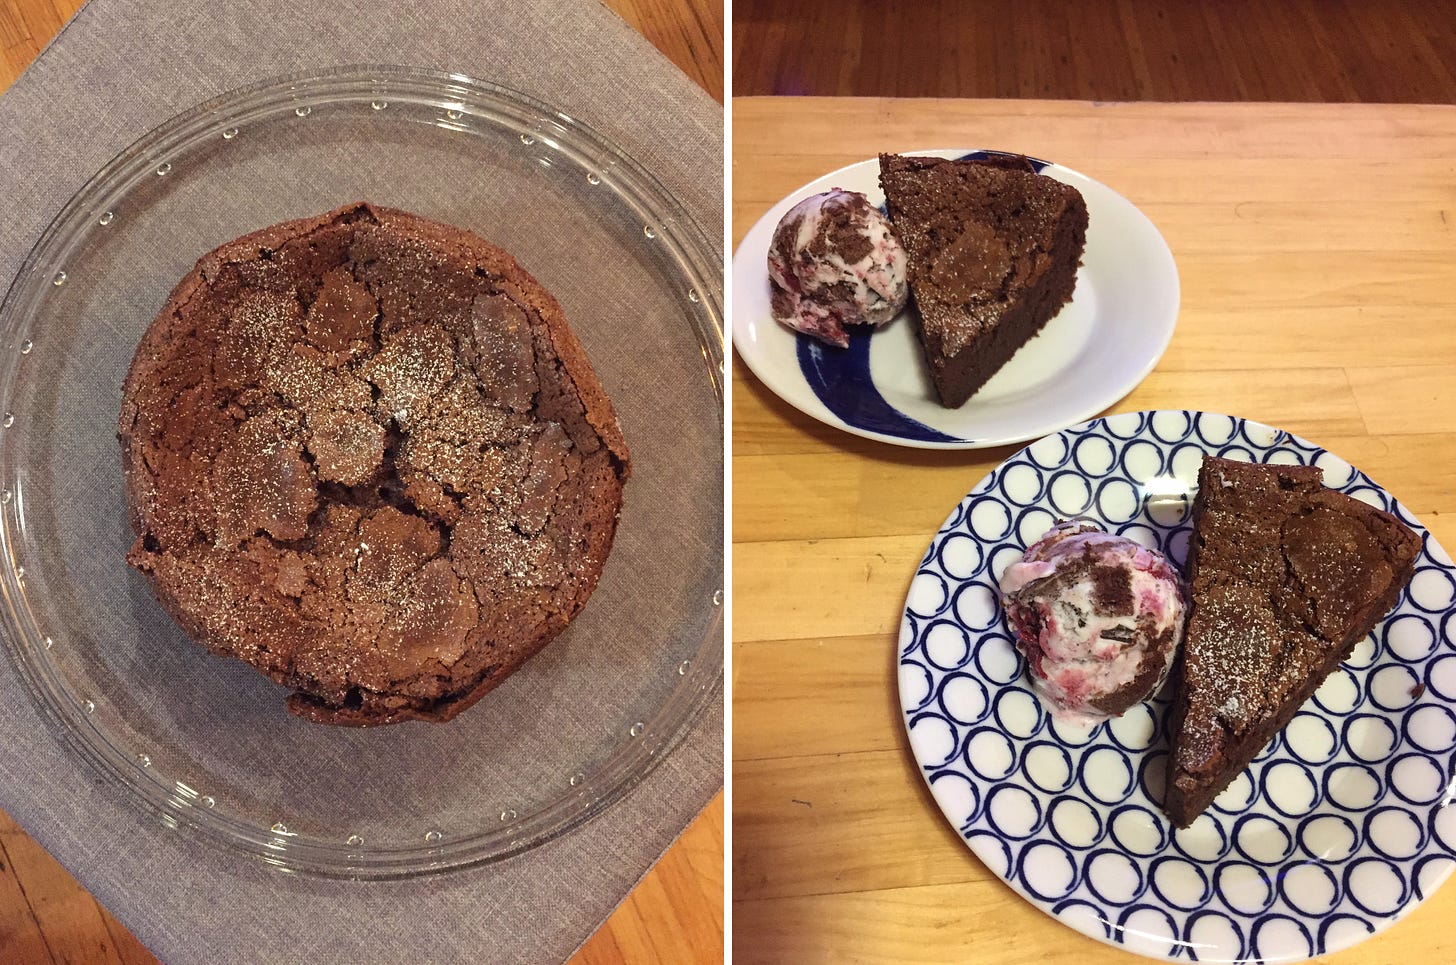 Left image: on a glass cake plate, a round chocolate cake with a crackled top, dusted with powdered sugar. Right image: two small blue and white plates with slices of the cake and scoops of icing with visible pieces of cherry and chocolate.